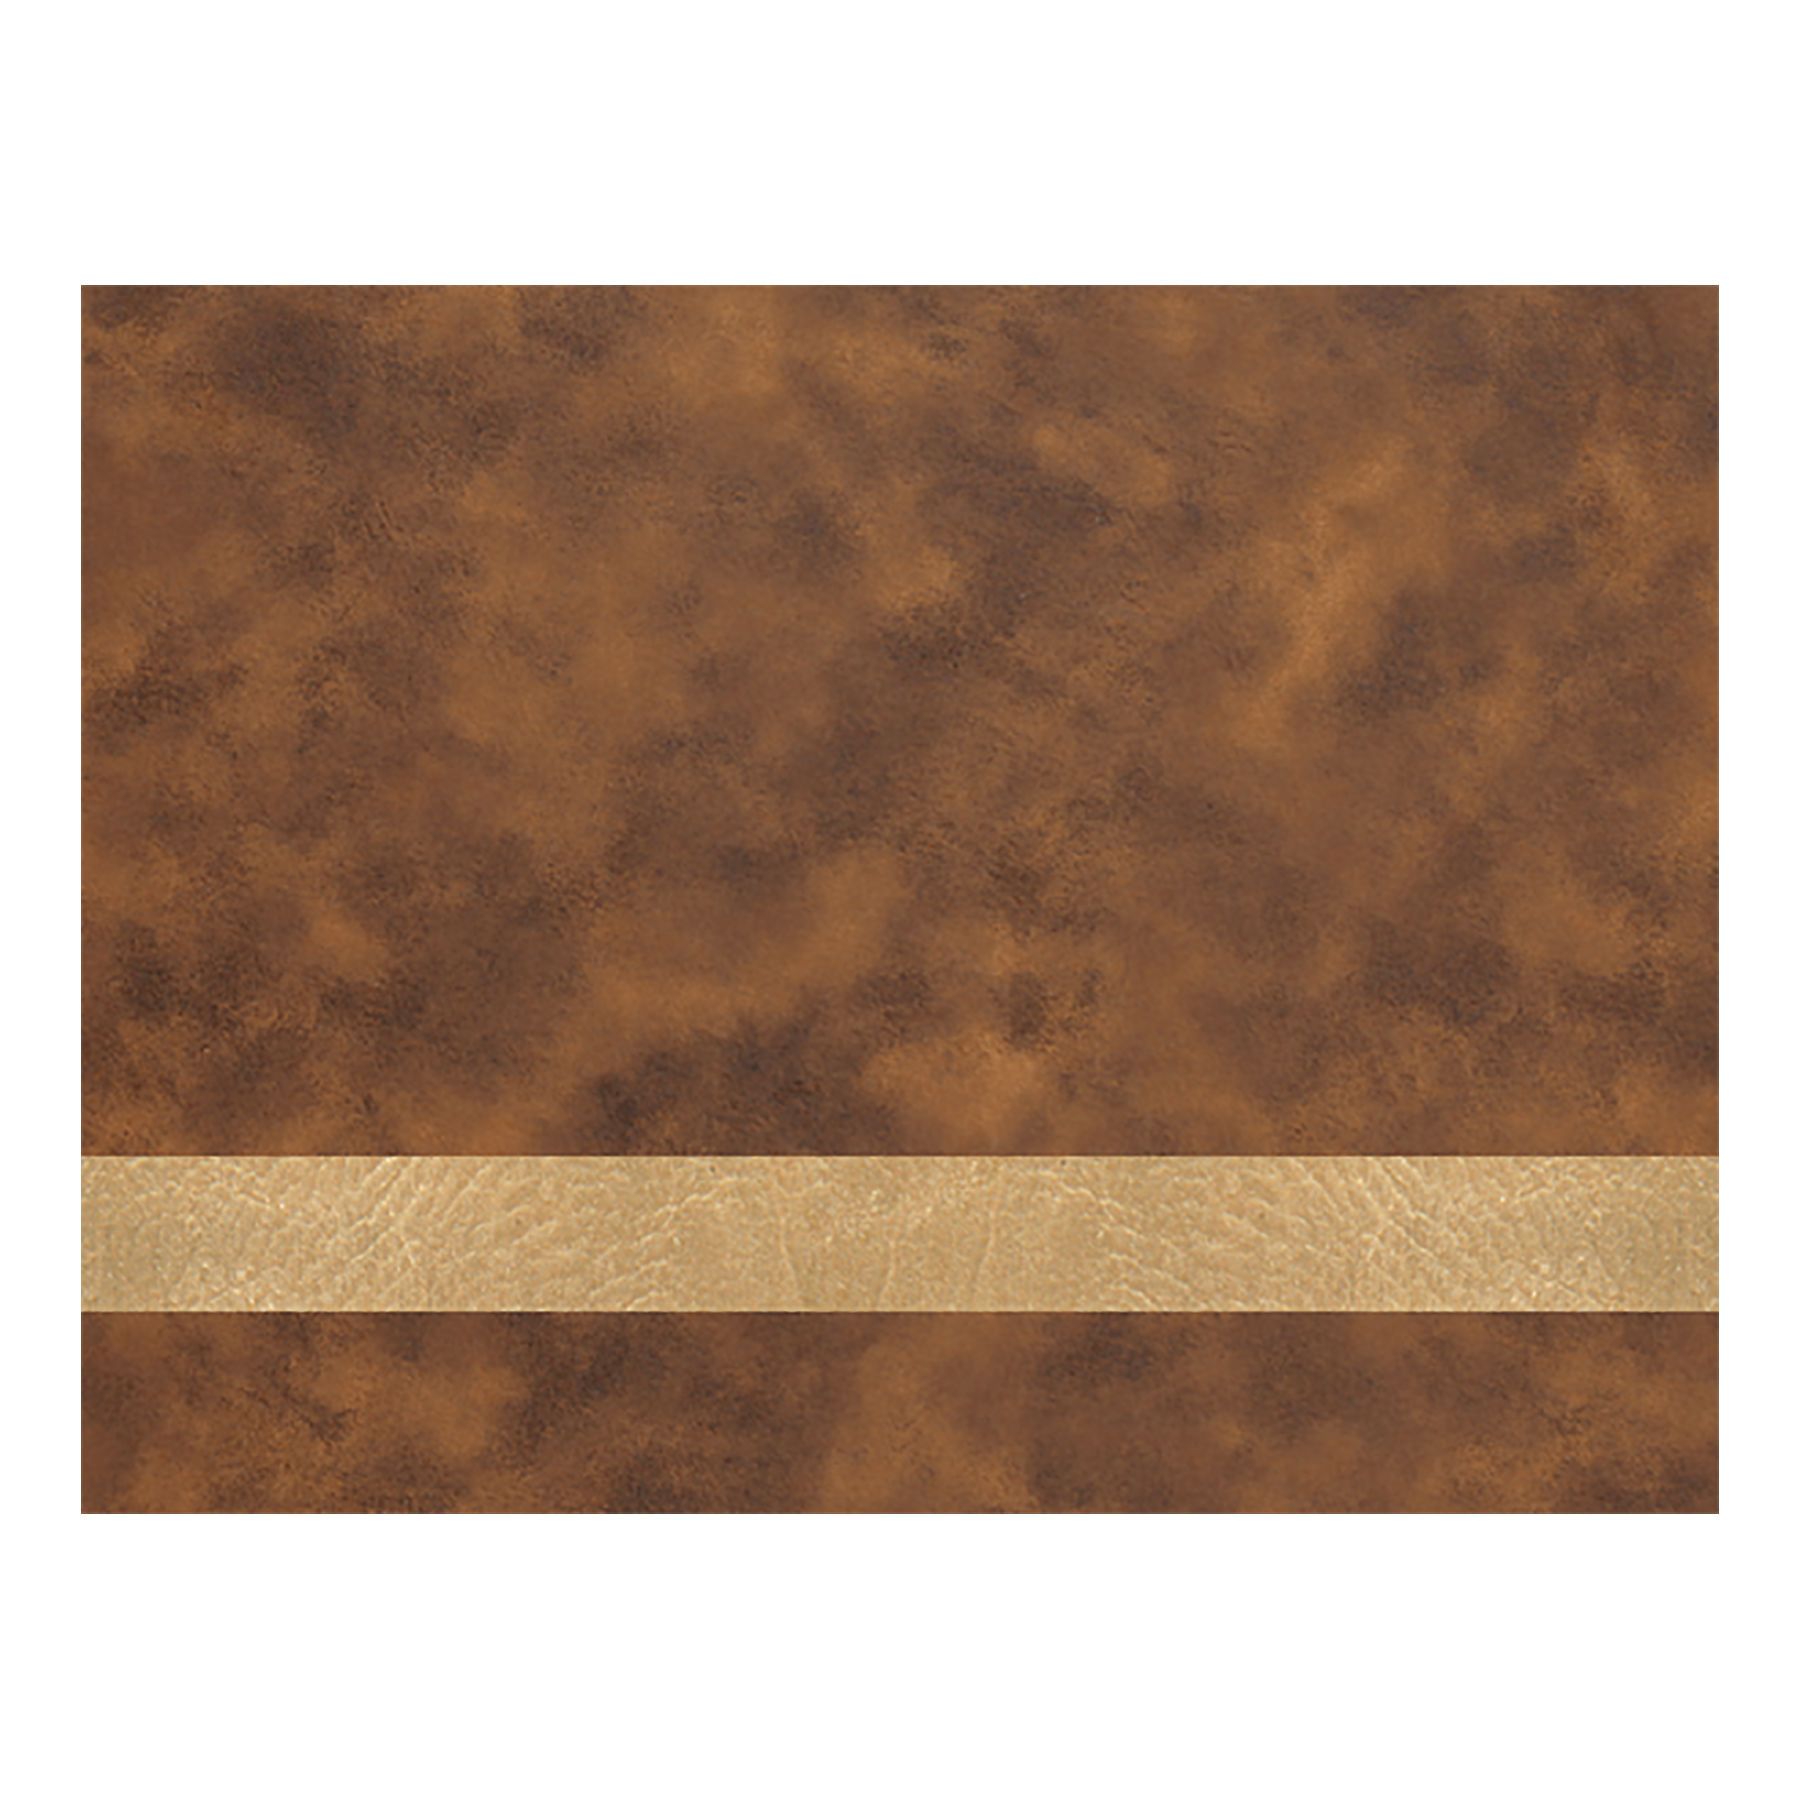 PRE-ORDER! Full Size Laserable Leatherette Sheet Stock, Laguna Laser Engravers (Available Jan. 2022) Engraving Supplies Craftworks NW SmartShop Laser|MX (36" x 24") Rustic/Gold 